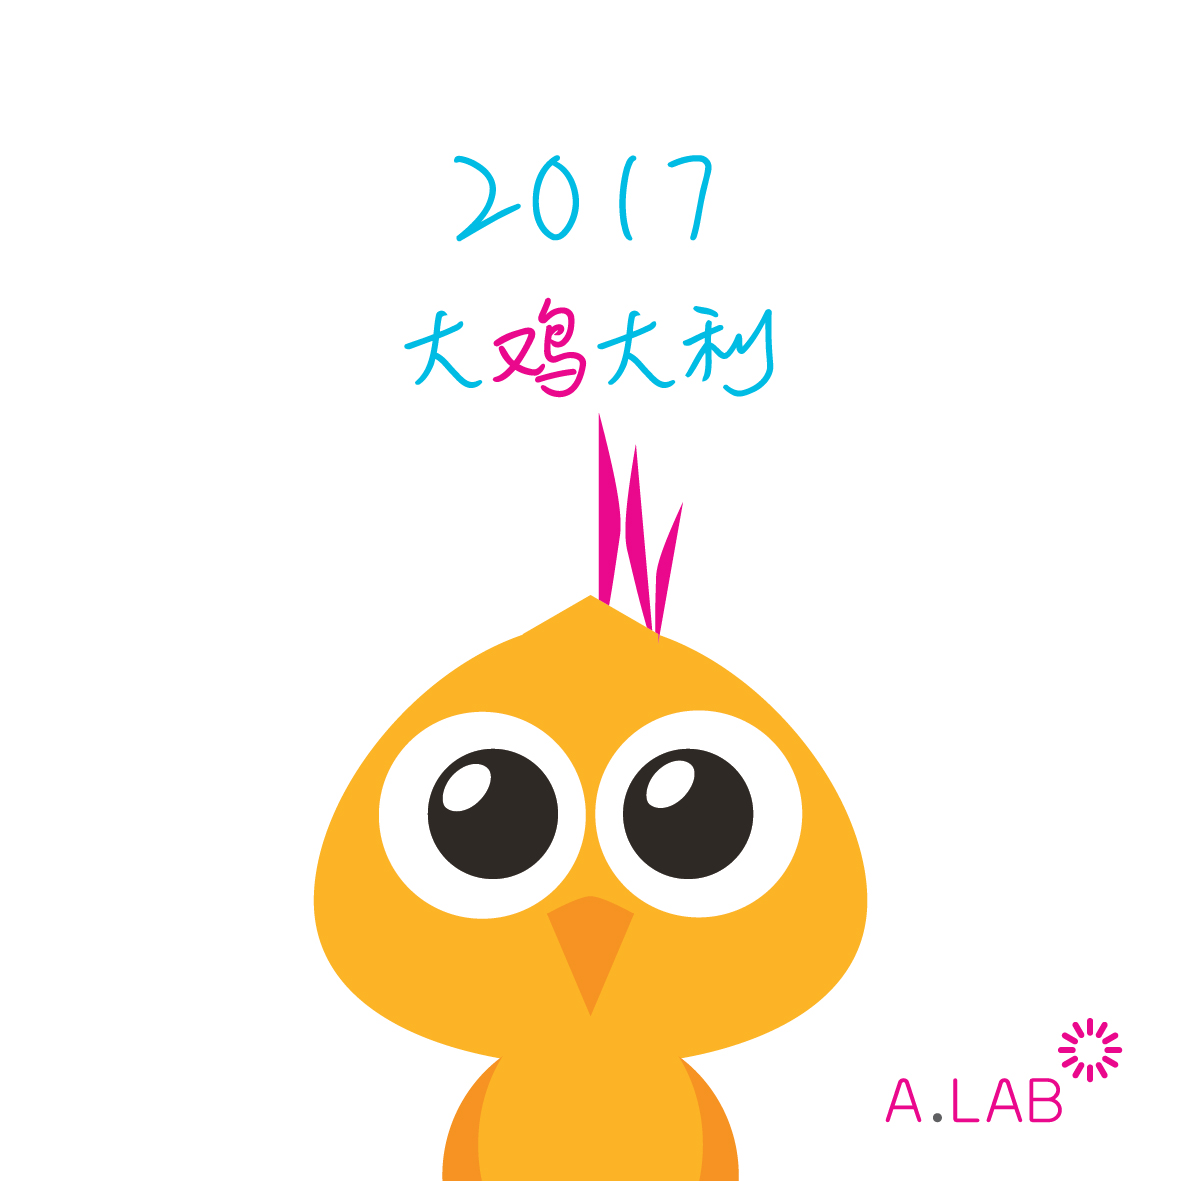 chinese-new-year-2017-a-lab